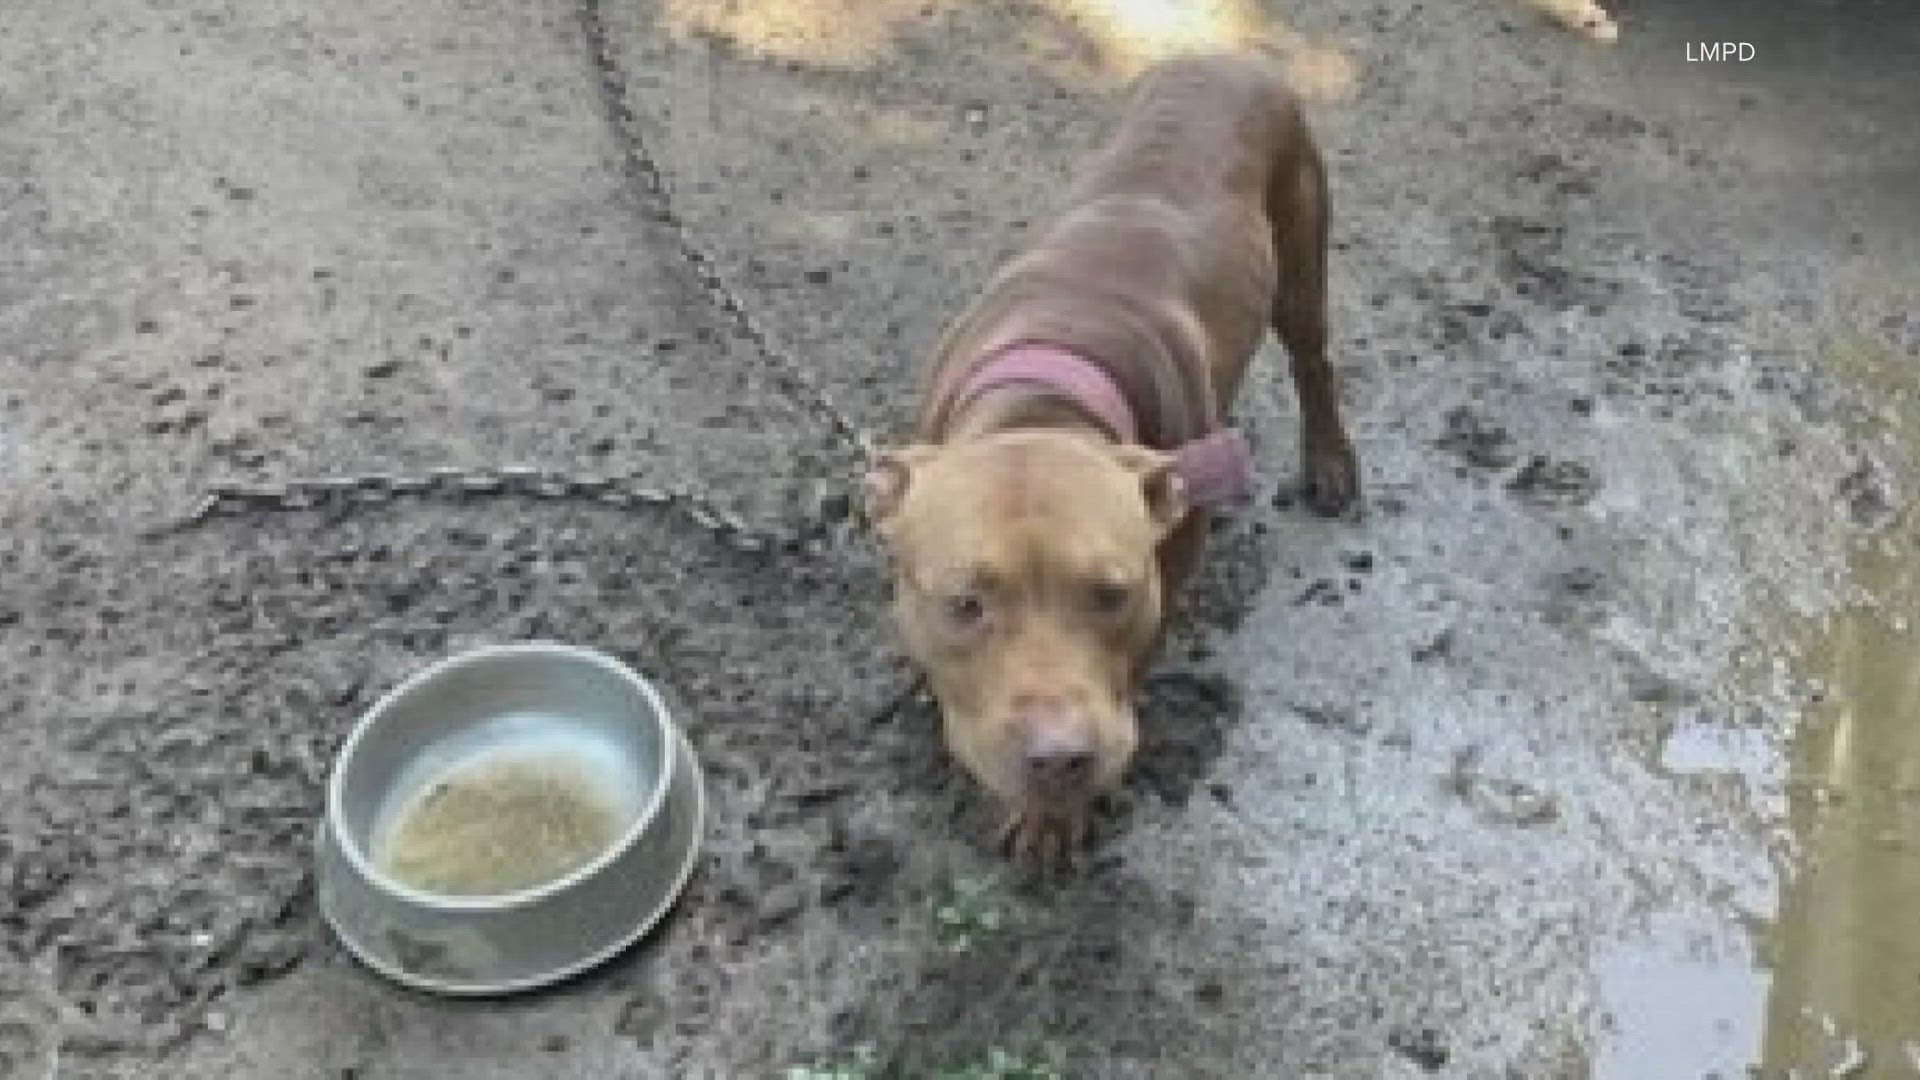 In a social media post, the department said a detailed tip led them to a home on Lillian Avenue where they arrested 47-year-old Kareem Garner for dog fighting.